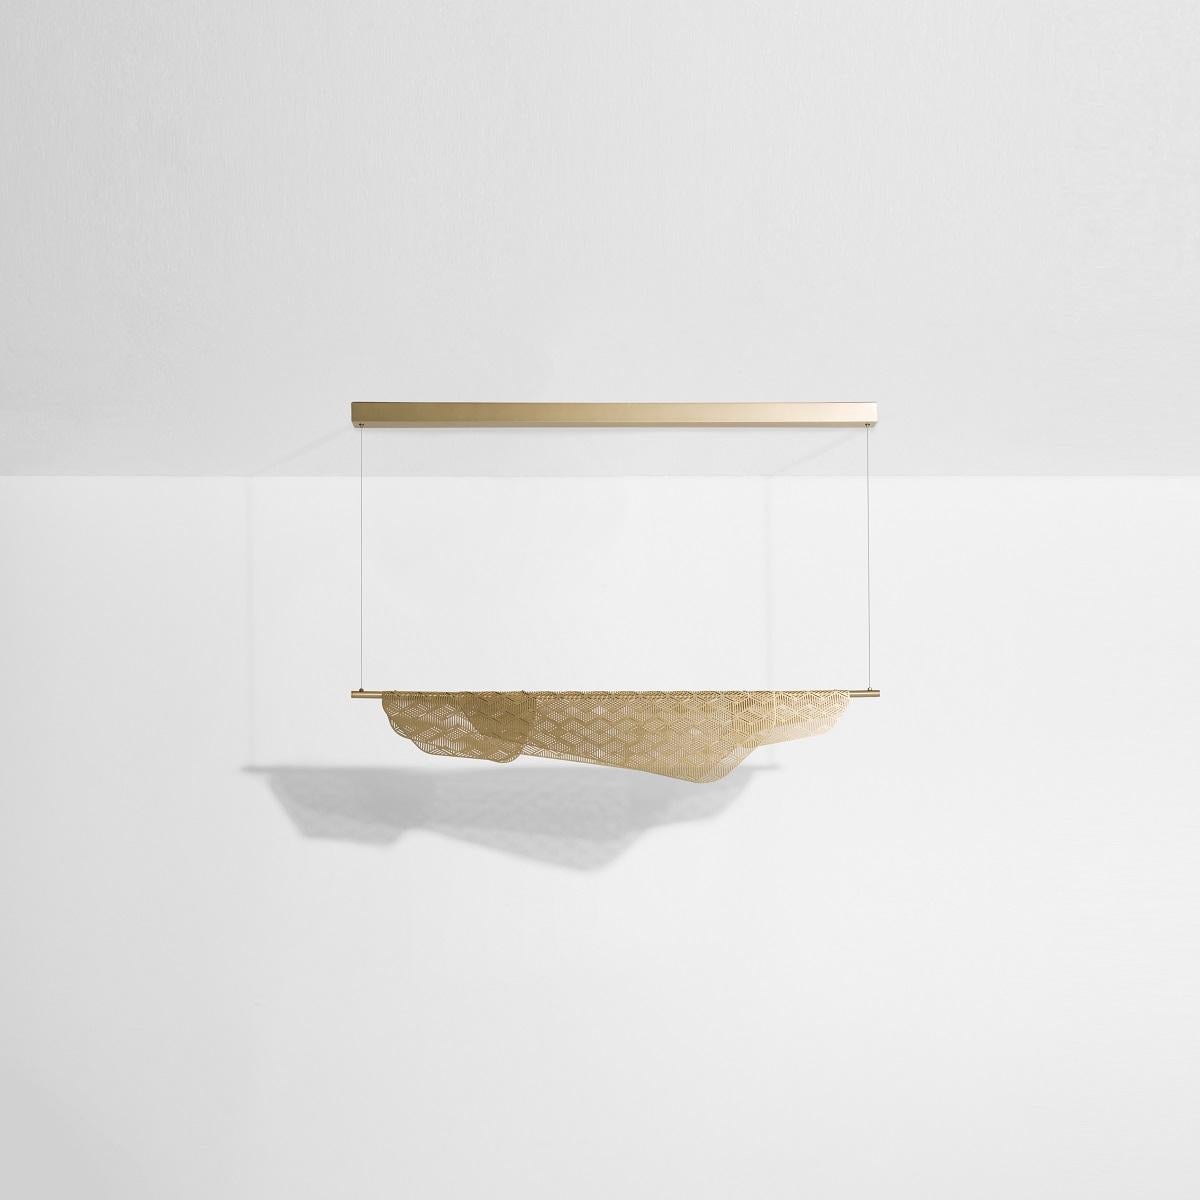 Petite Friture Small Mediterranea Pendant Light in Brushed Brass by Noé Duchaufour-Lawrance, 2016

Inspired by the weightlessness of 